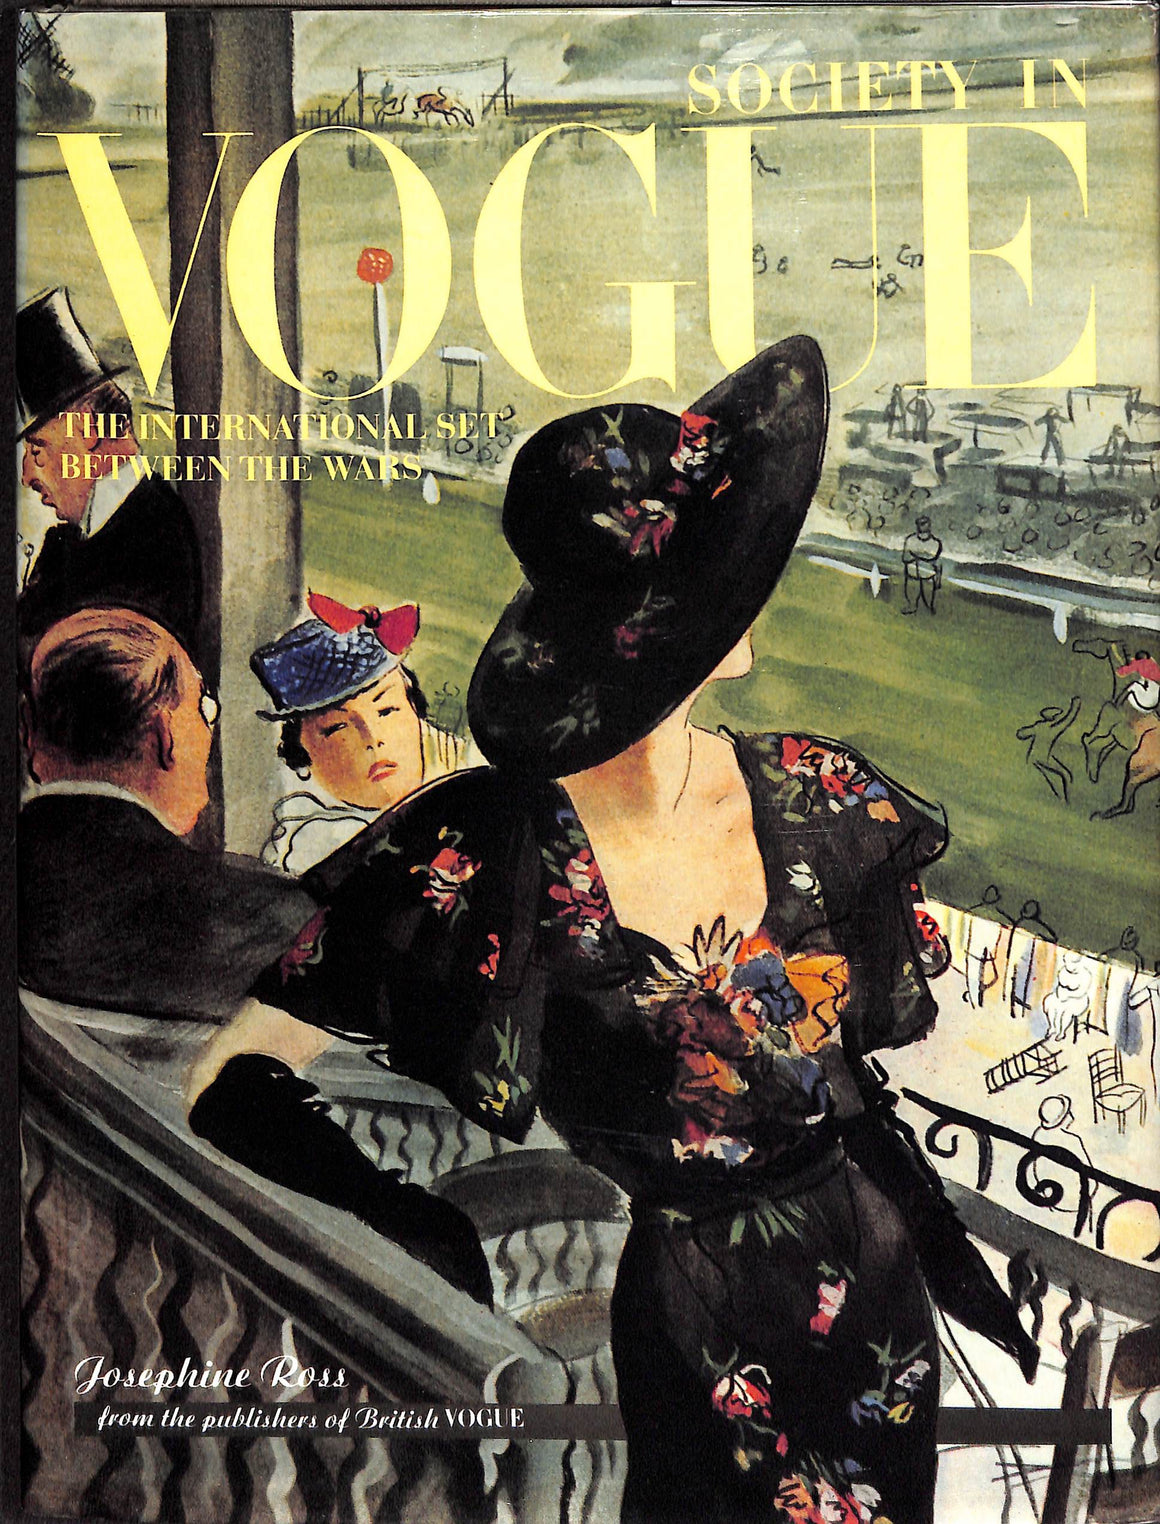 "Society In Vogue: The International Set Between The Wars" 1992 ROSS, Josephine (SOLD)